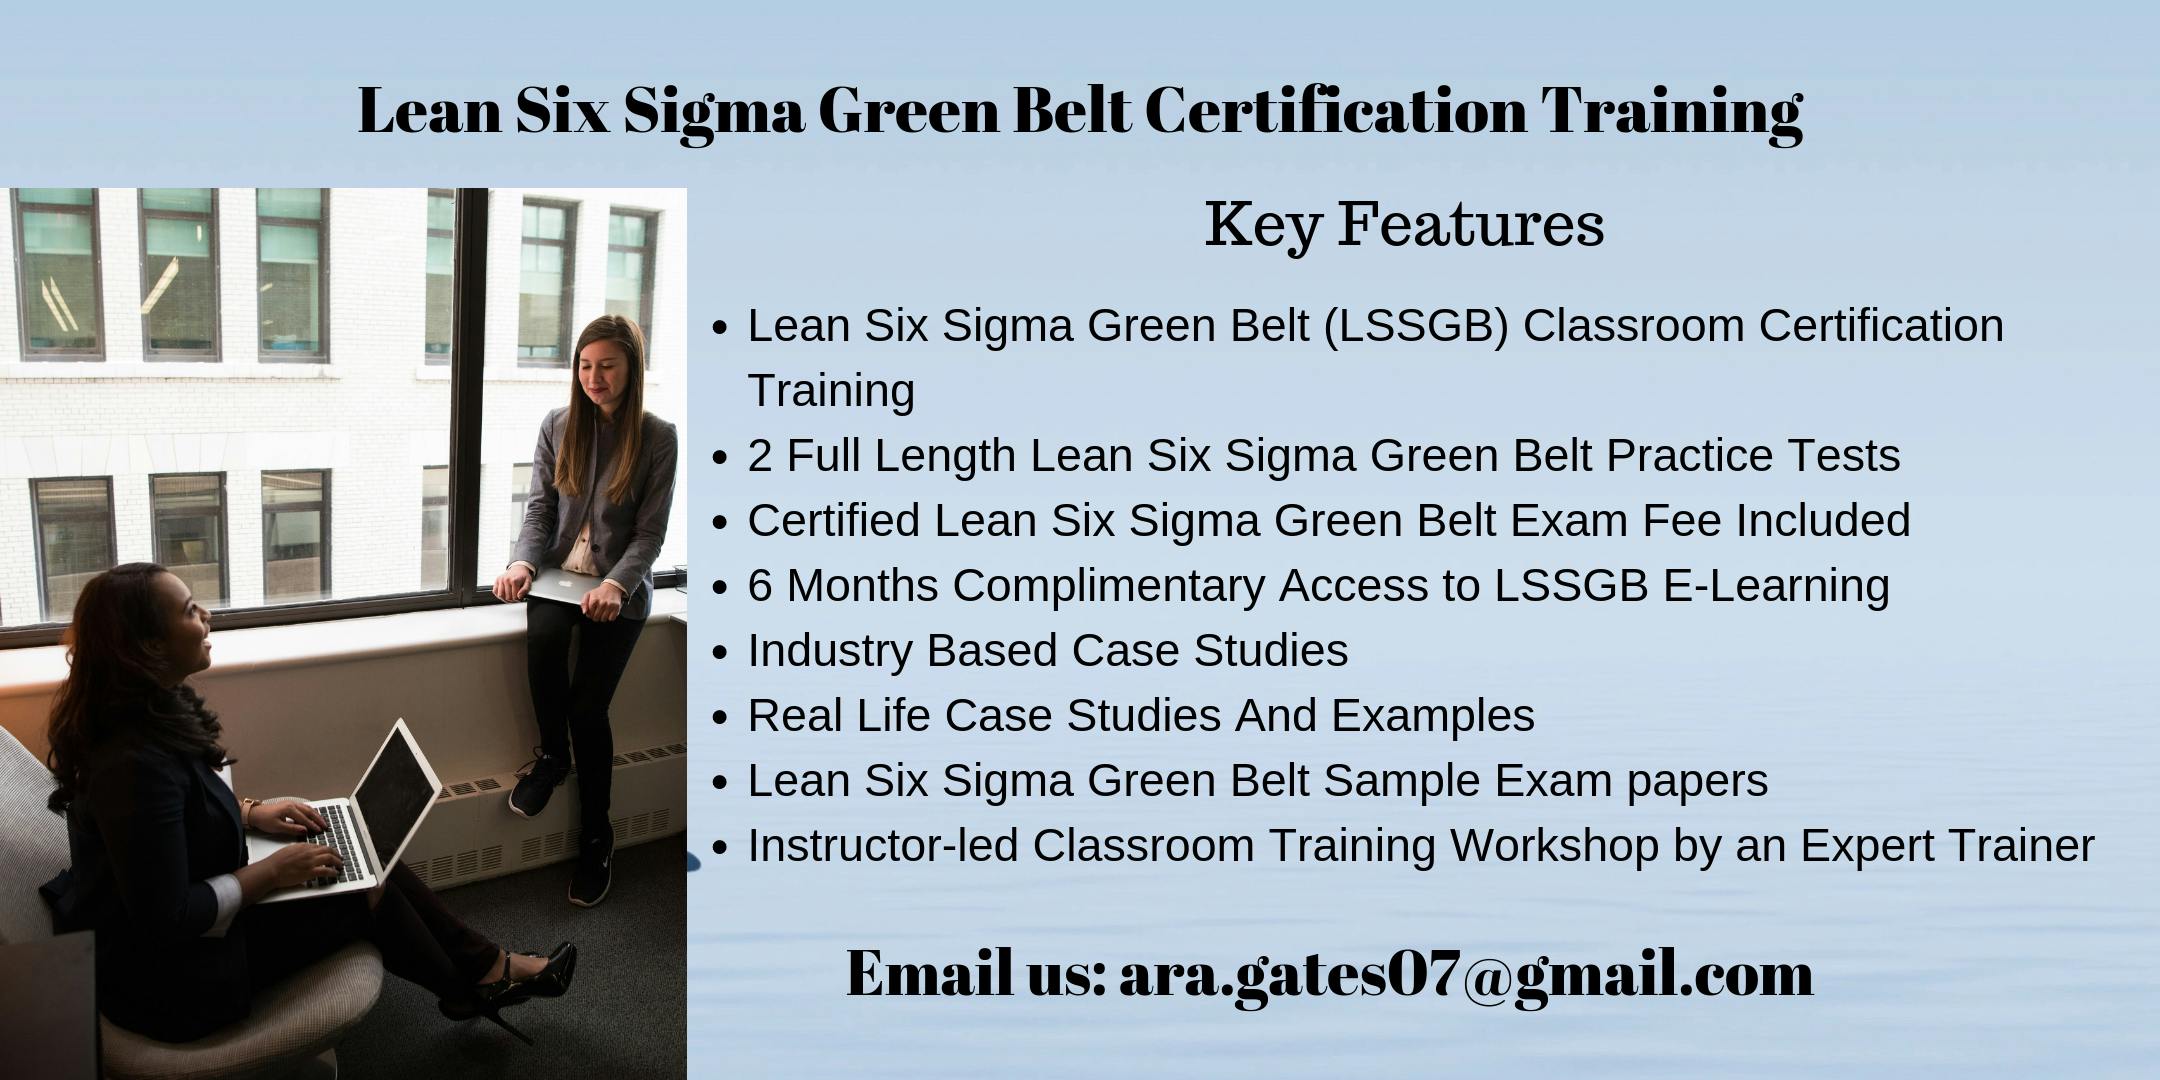 LSSGB Certification Course in Santa Fe, NM